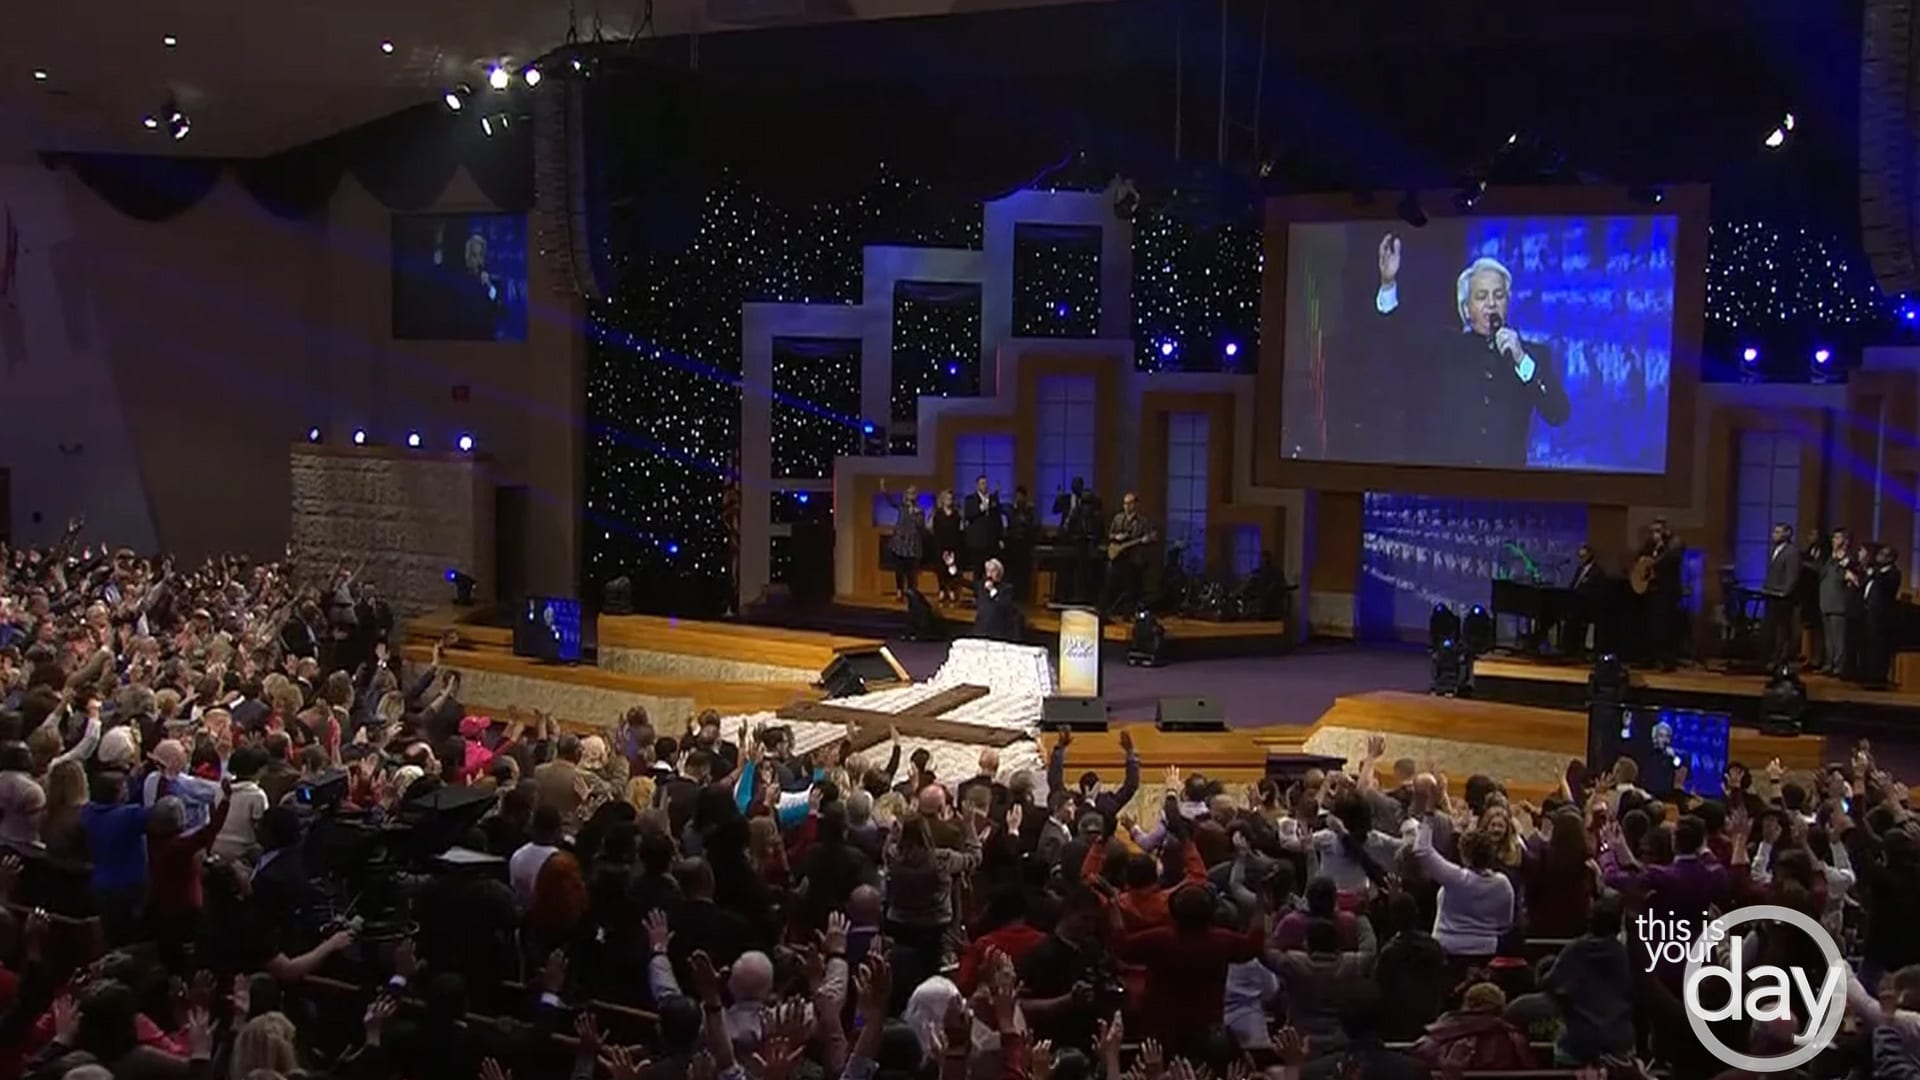 Turn Your Eyes Upon Jesus - This Is Your Day - Benny Hinn Ministries.